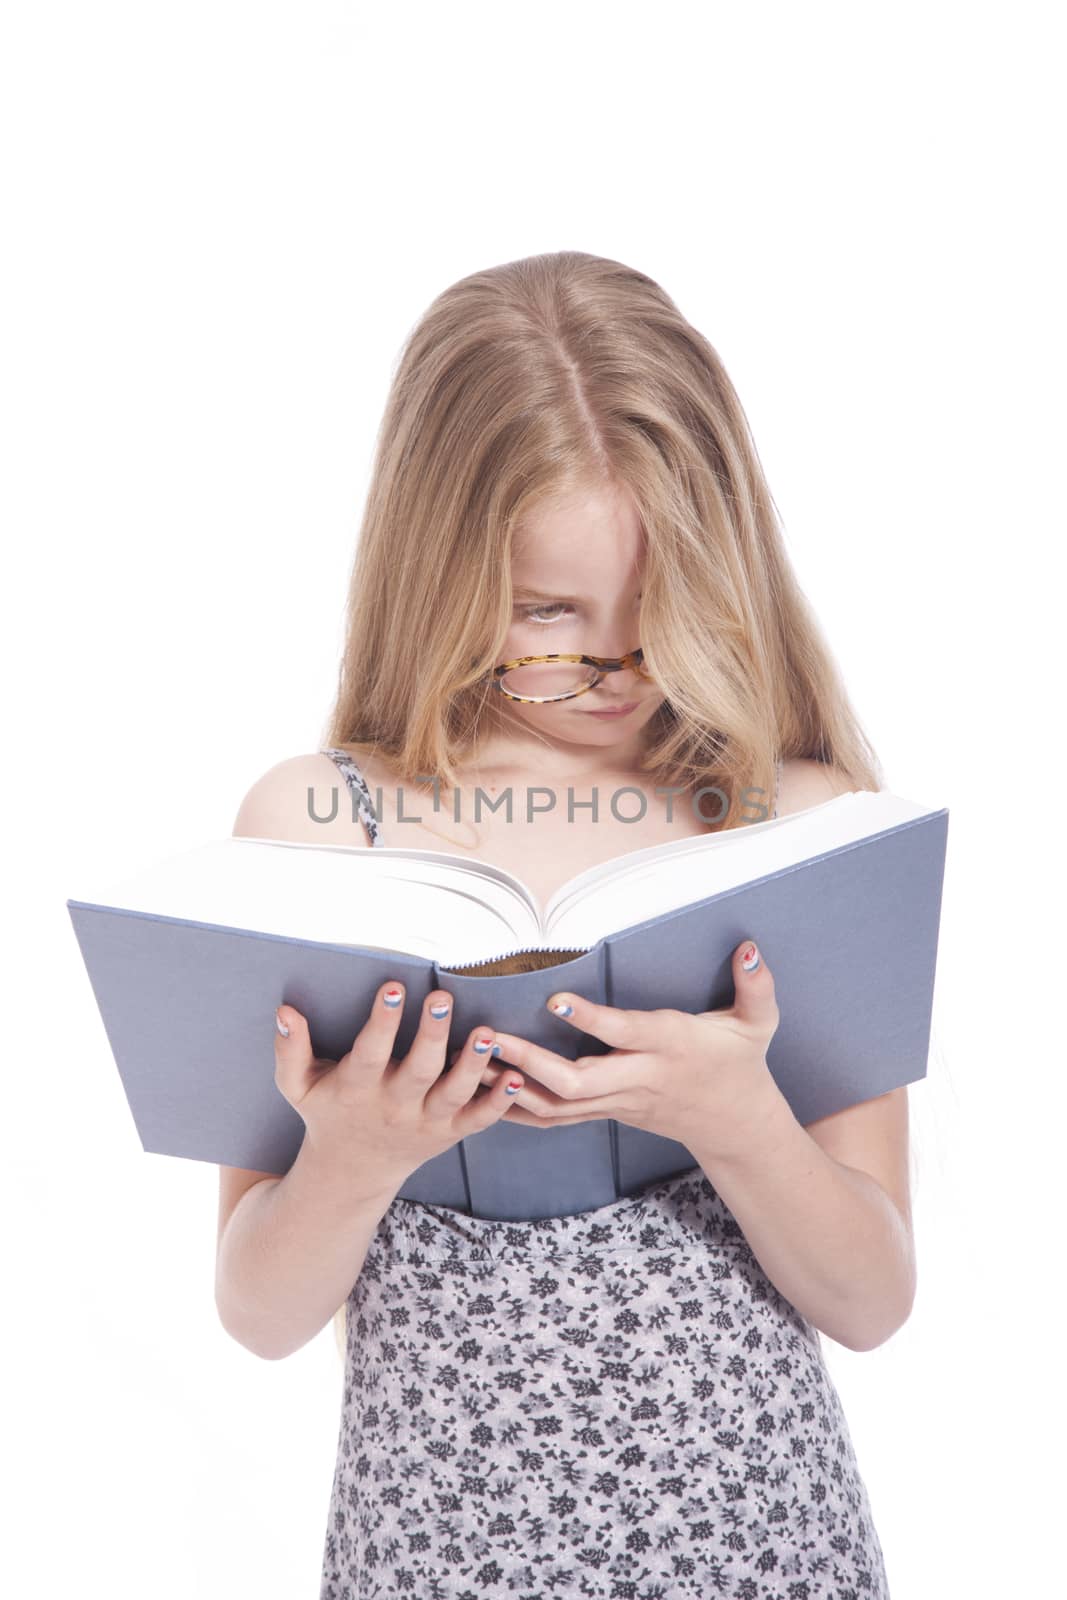 young blond girl with glasses and large book in studio against white background